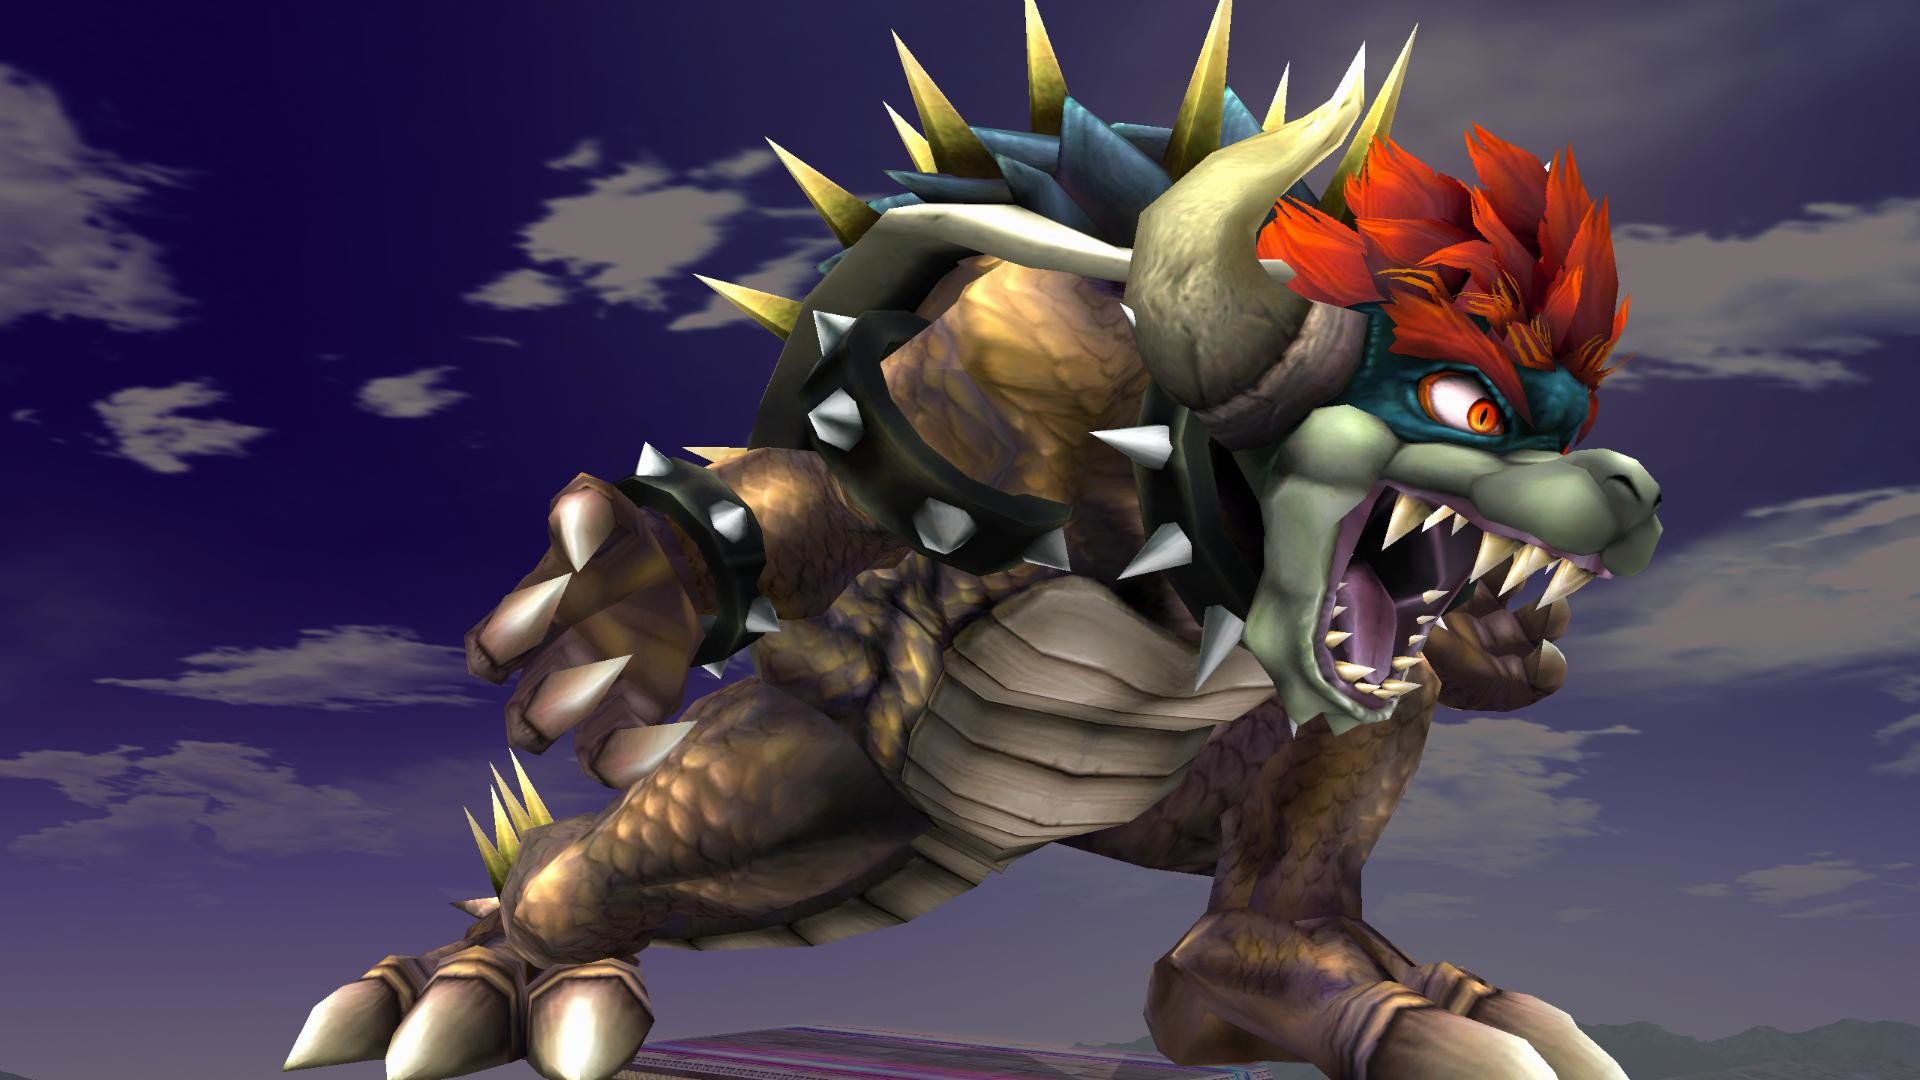 1920x1080 wallpaper.wiki-Picture-of-Bowser-PIC-WPB0013882